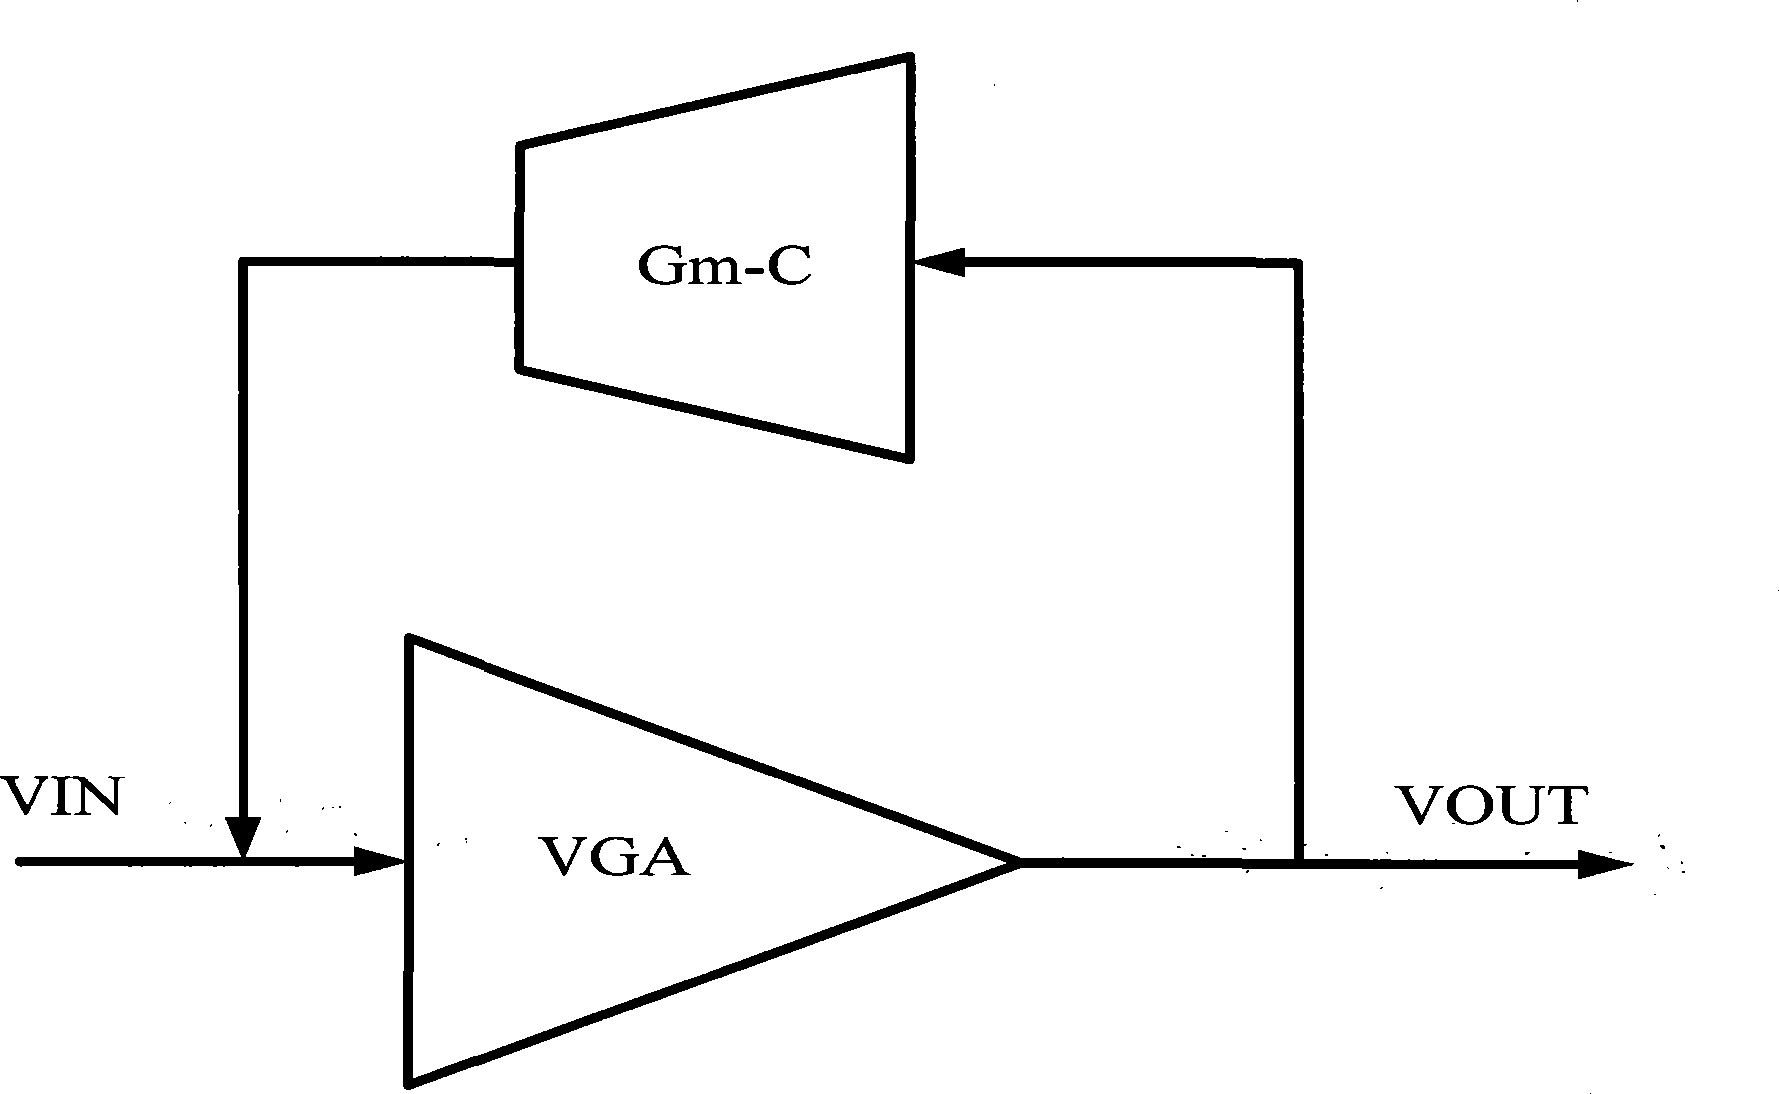 Amplifier with band-pass filtering function